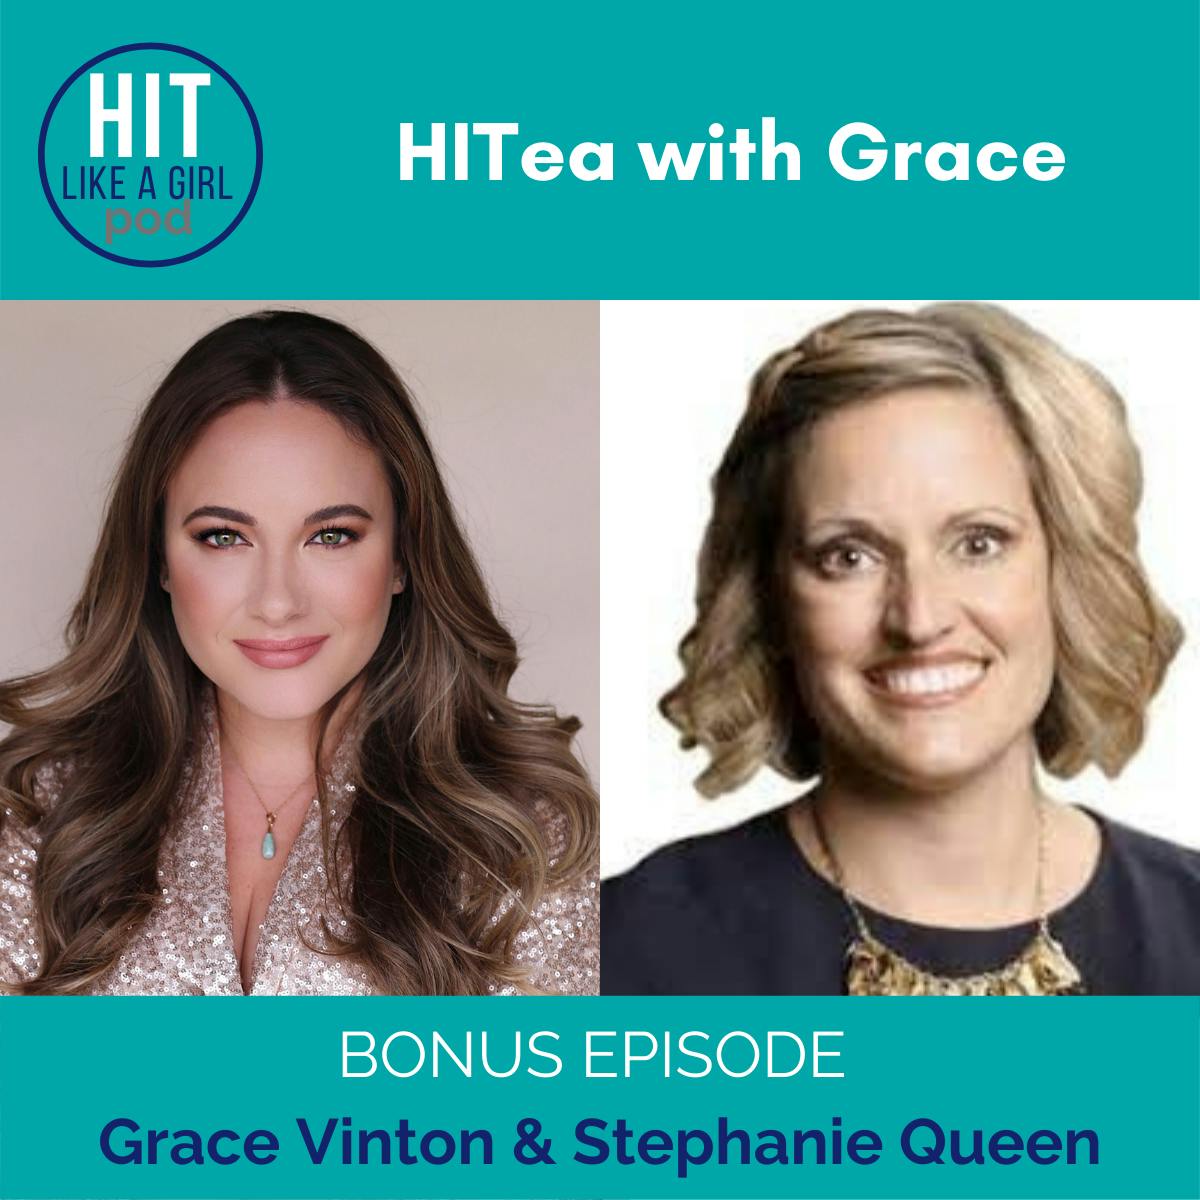 Grace Vinton & Stephanie Queen Discuss What it Takes to Provide Healthcare from a Helicopter